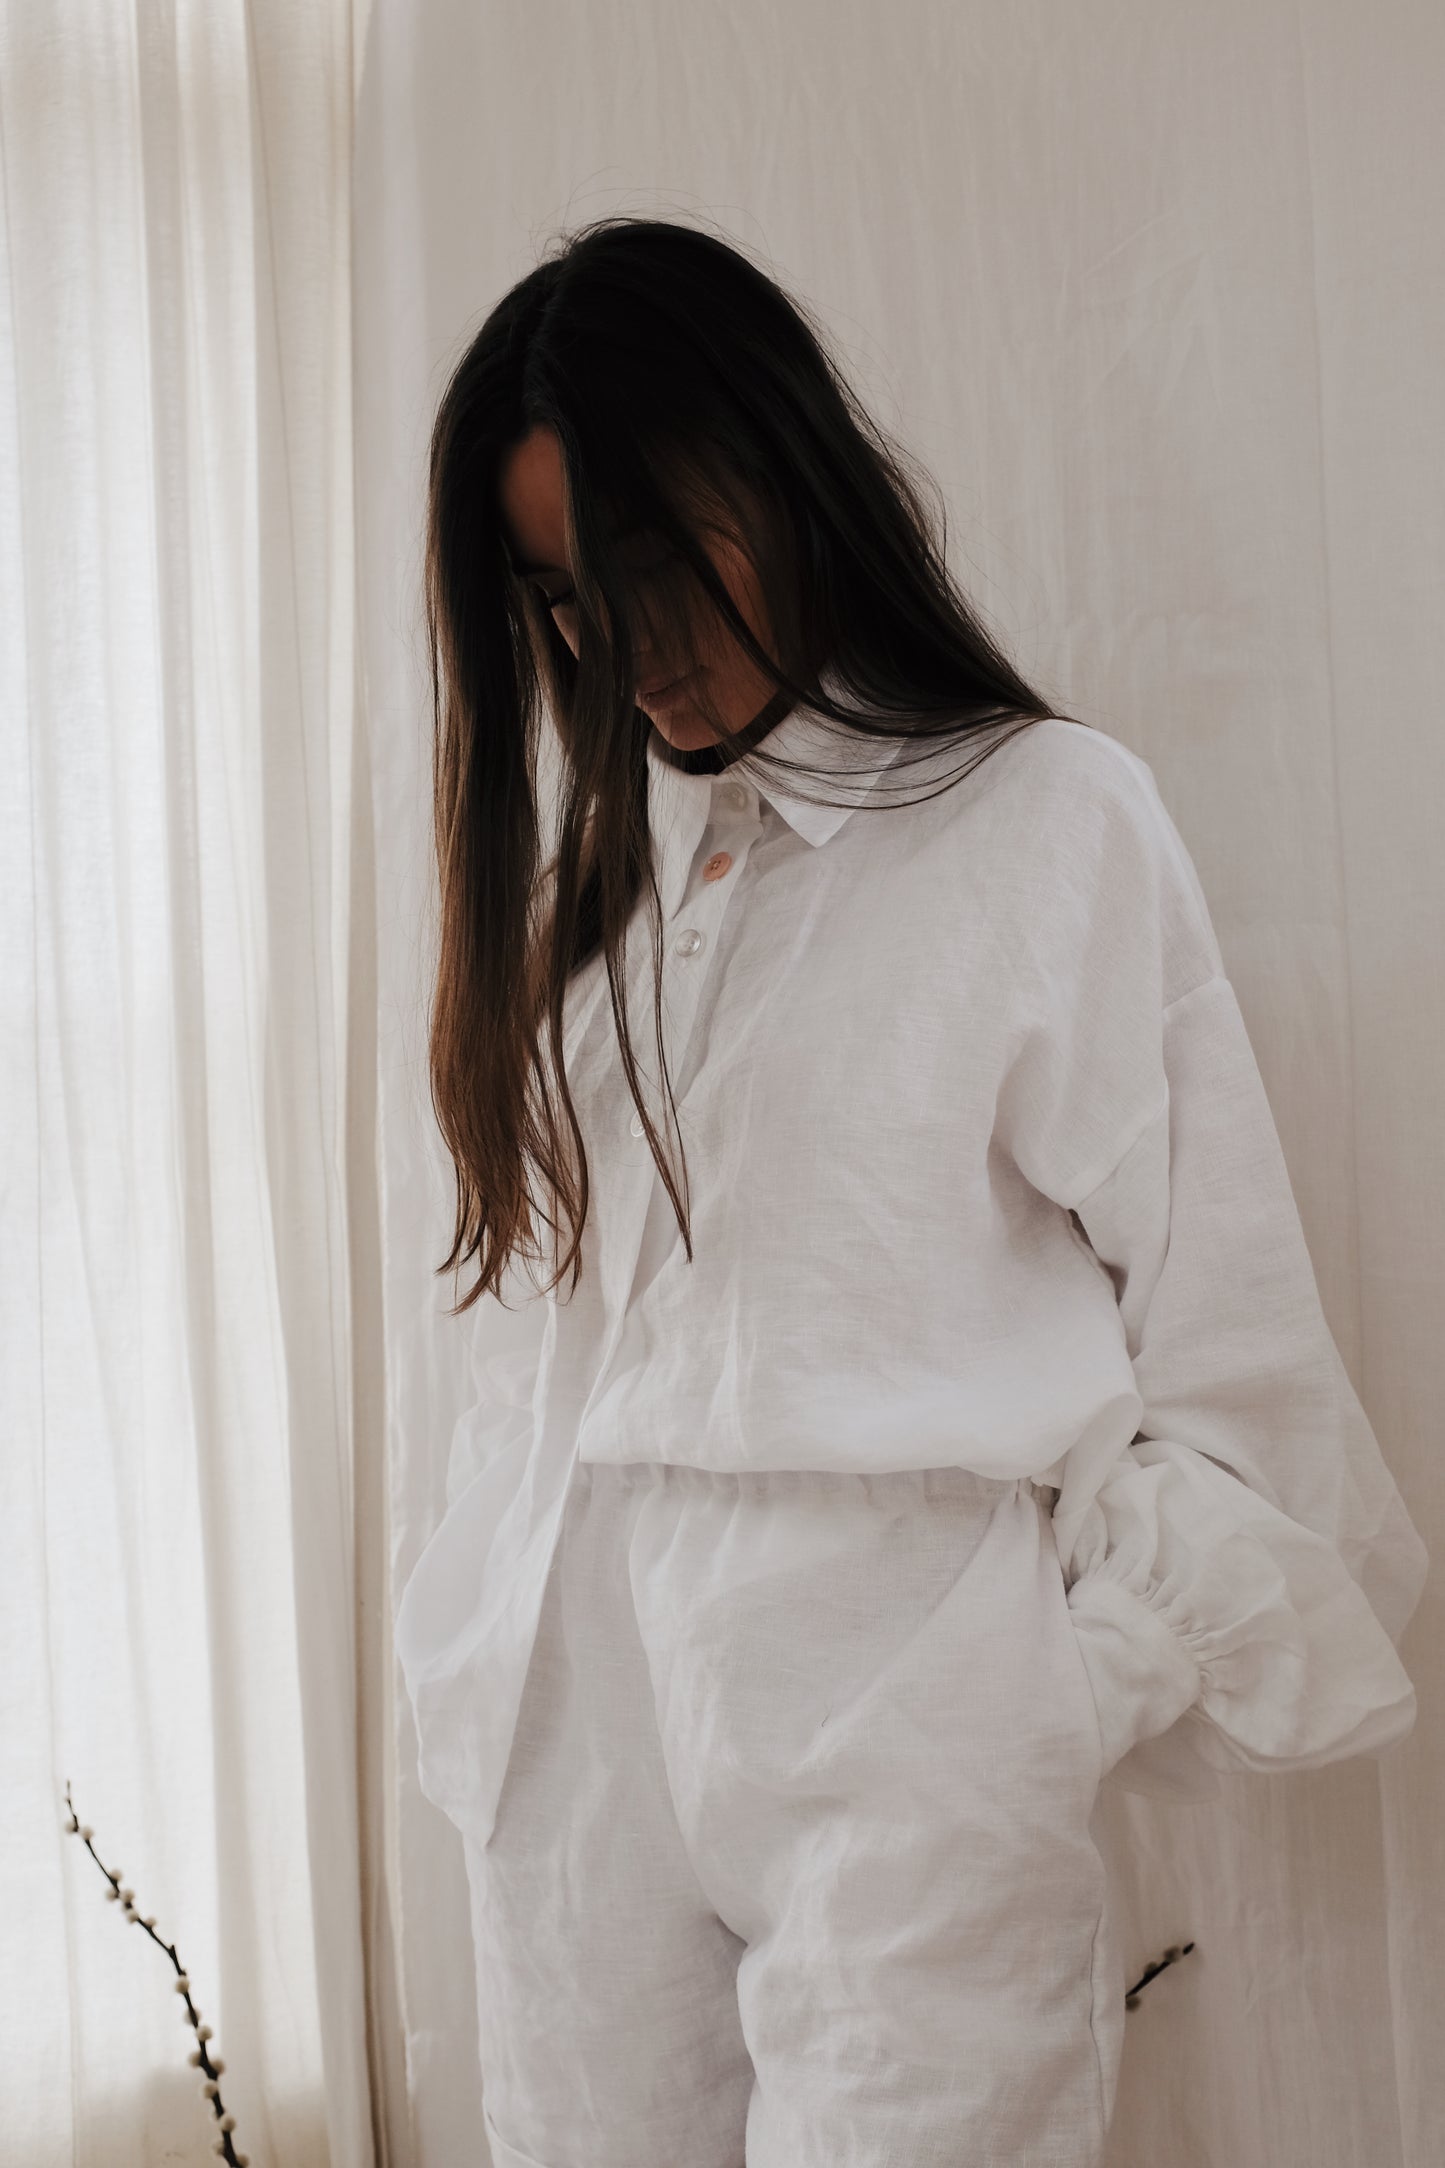 CADHLA | PEARL SET | Pajamas for the outdoors. Whether you’re lounging at home, by the pool, or nipping out for a coffee in the sunshine, our Cadhla linen loungewear set is what your wardrobe is crying out for. The Cadhla shirt can be worn on reverse with